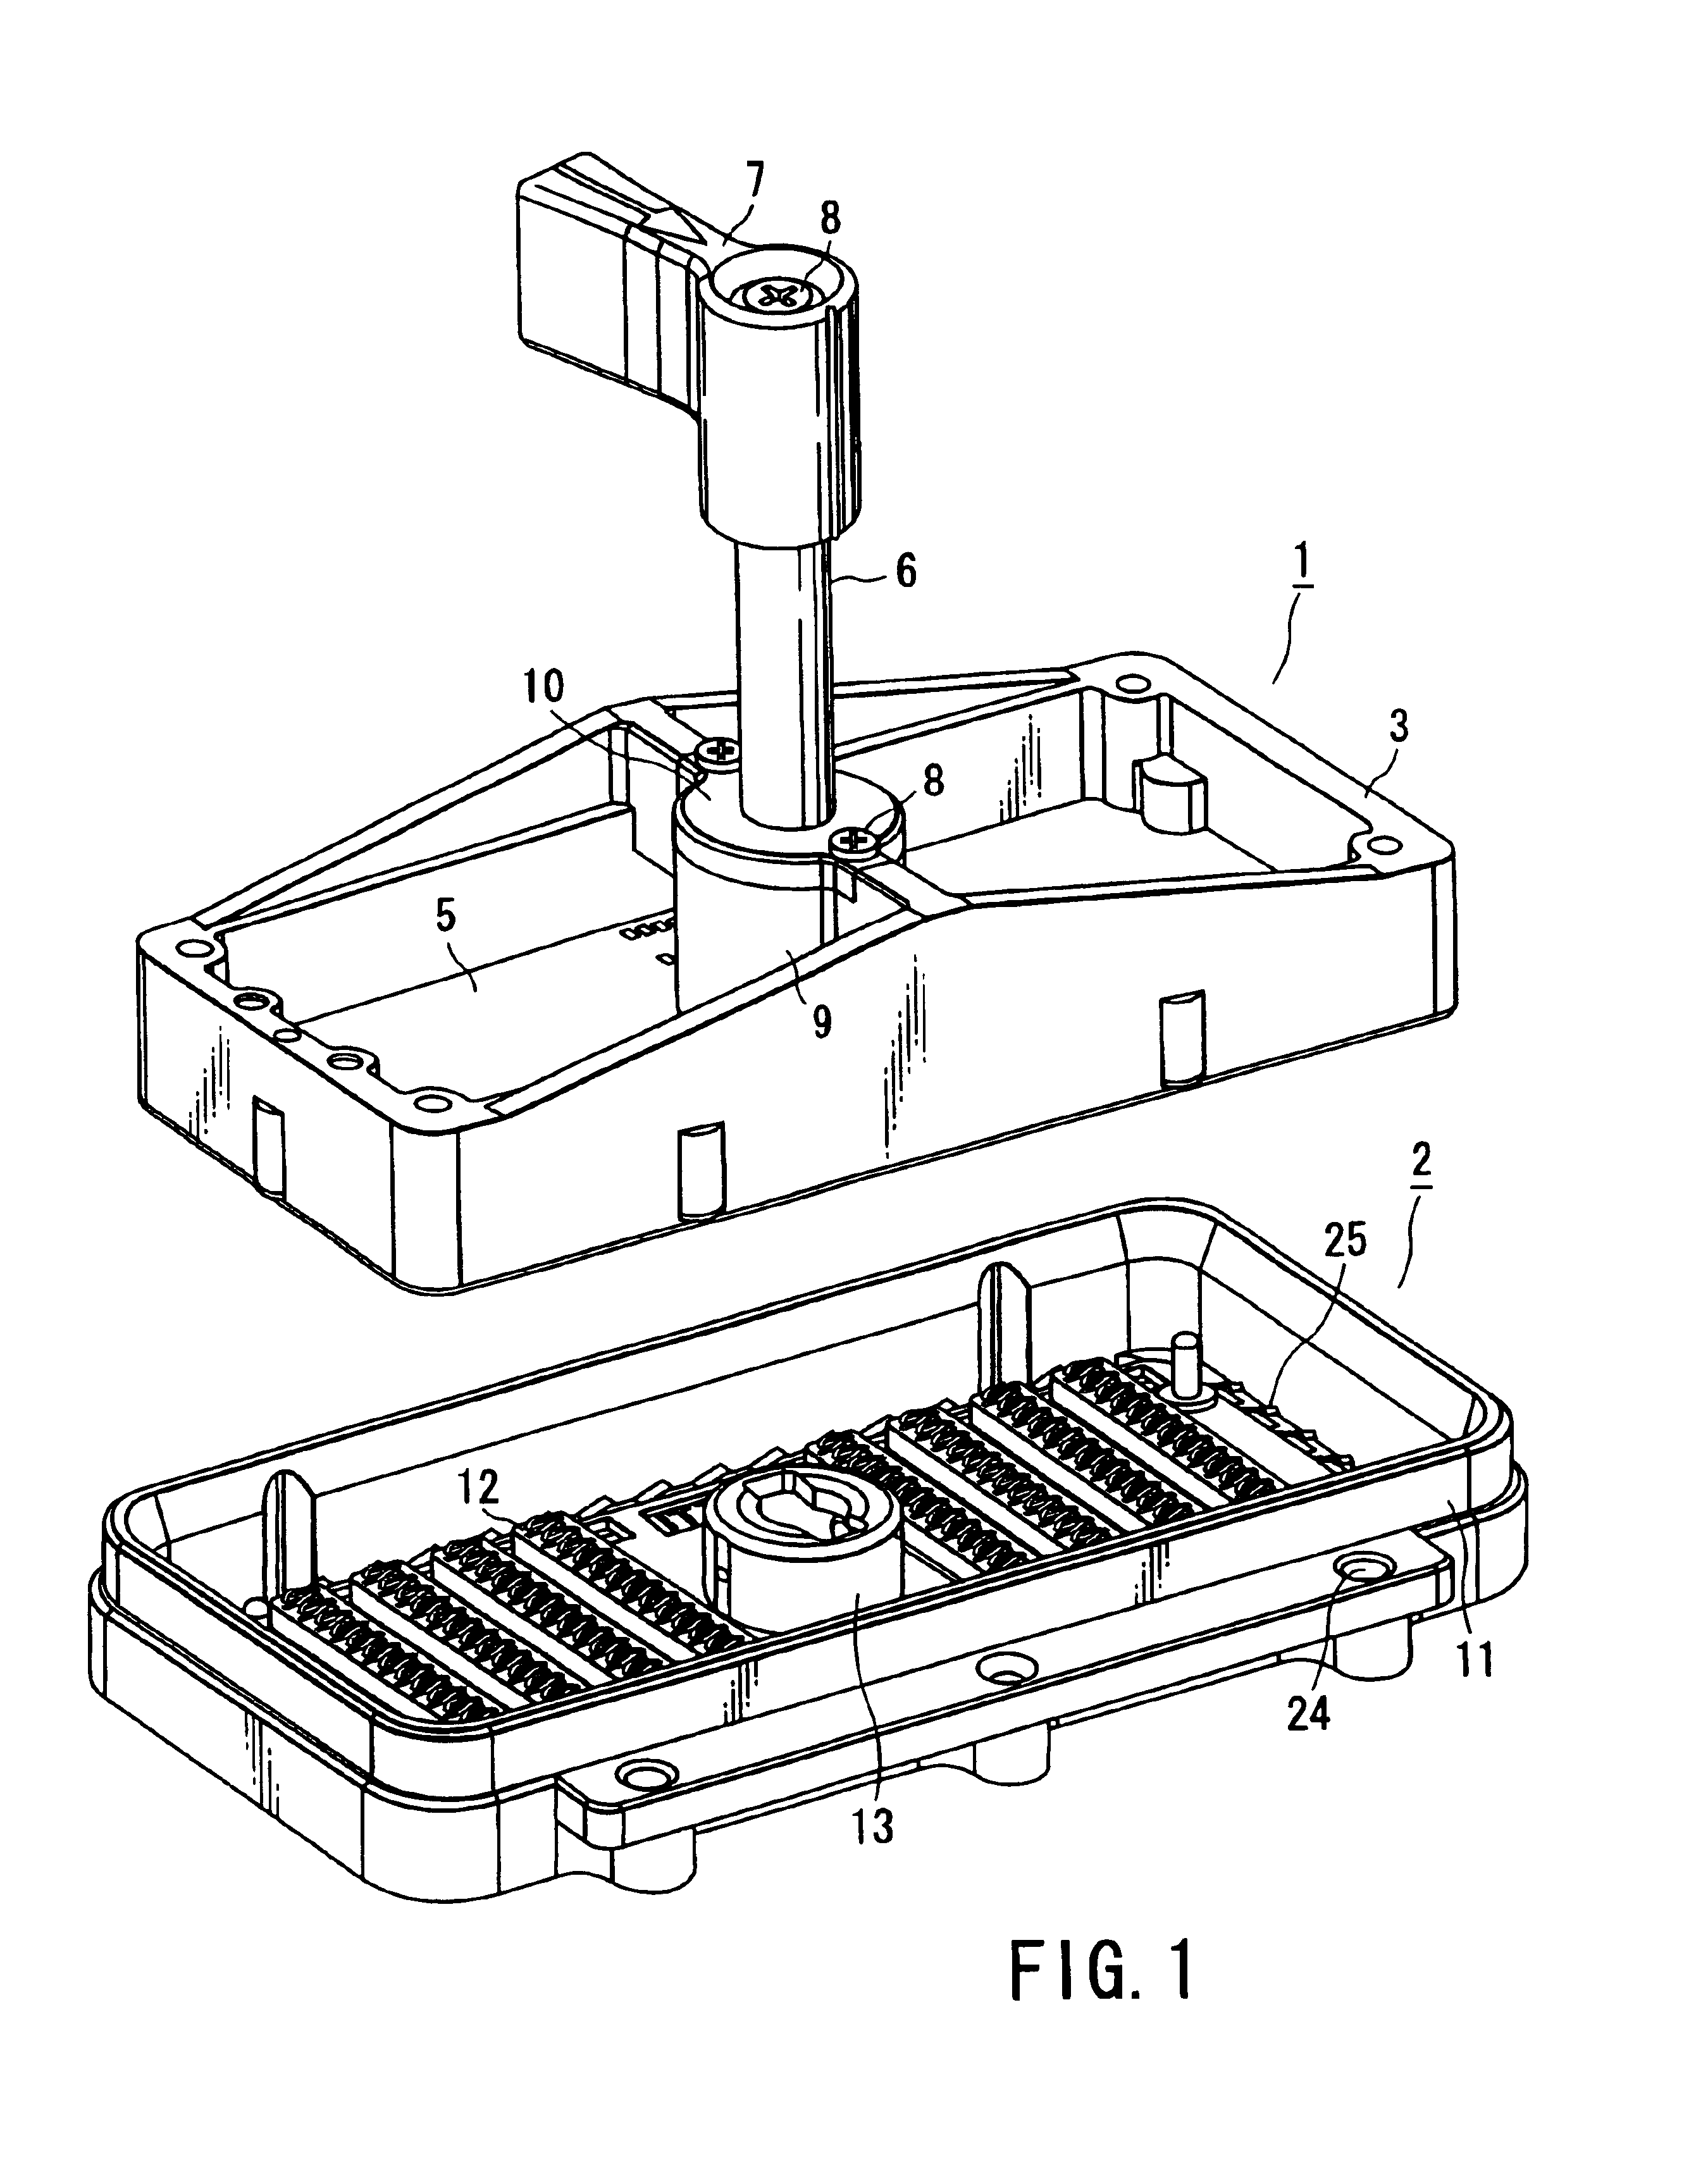 Multicore connector for connecting a plurality of contact pads of a circuit board to a plurality of contacts in a one-to-one correspondence